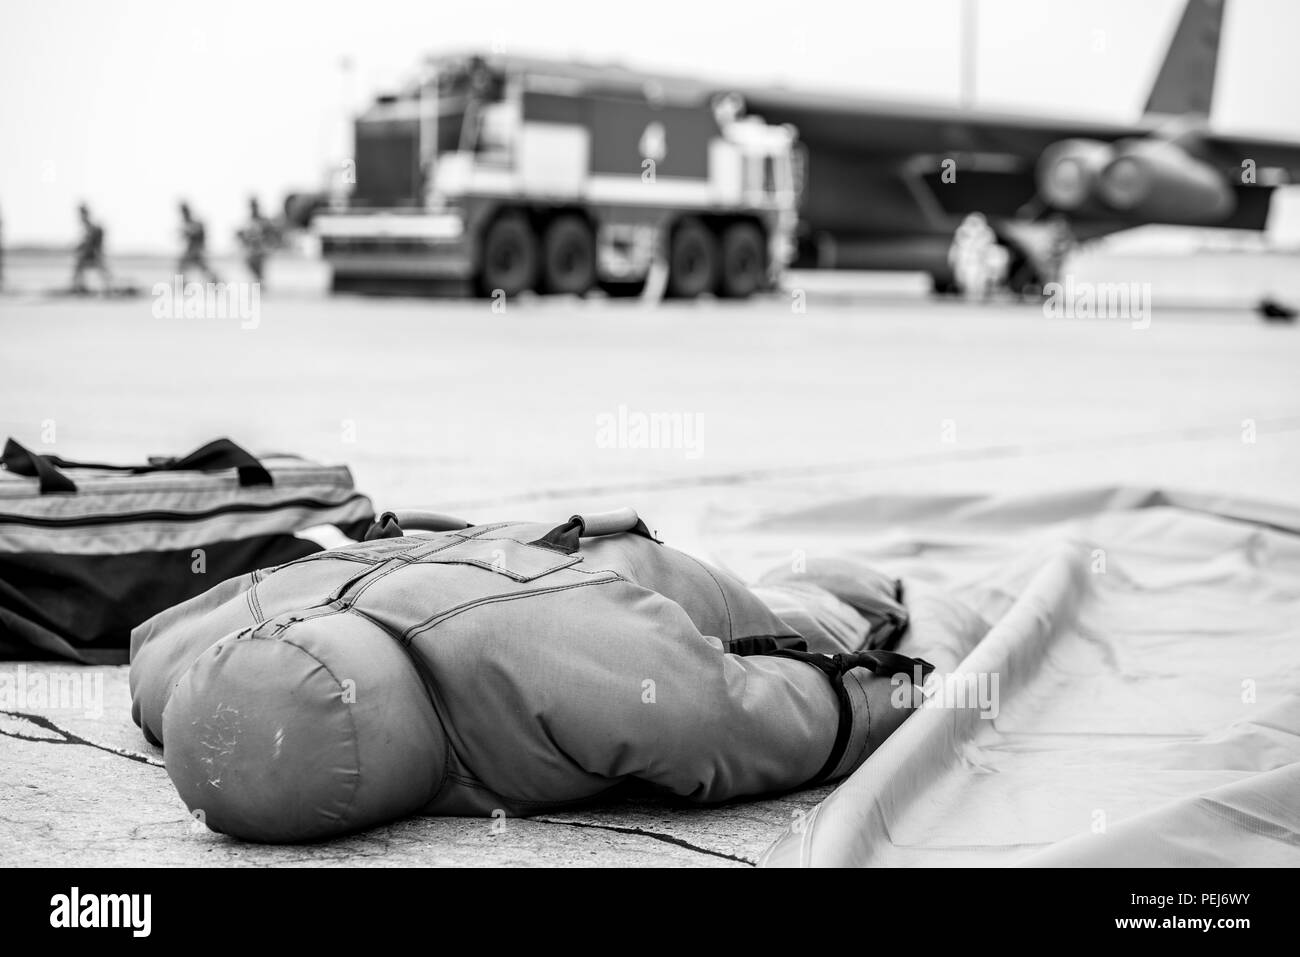 A training dummy, representing a victim, lies on the flightline after being rescued from a simulated B-52H Stratofortress engine fire during a training exercise at Minot Air Force Base, N.D., Aug. 28, 2015. The two training dummies represented injured personnel, one in the cockpit and the other outside the aircraft, were used to test firefighters ability to evacuate victims from difficult locations. (U.S. Air Force photo/ Airman 1st Class J. T. Armstrong) Stock Photo